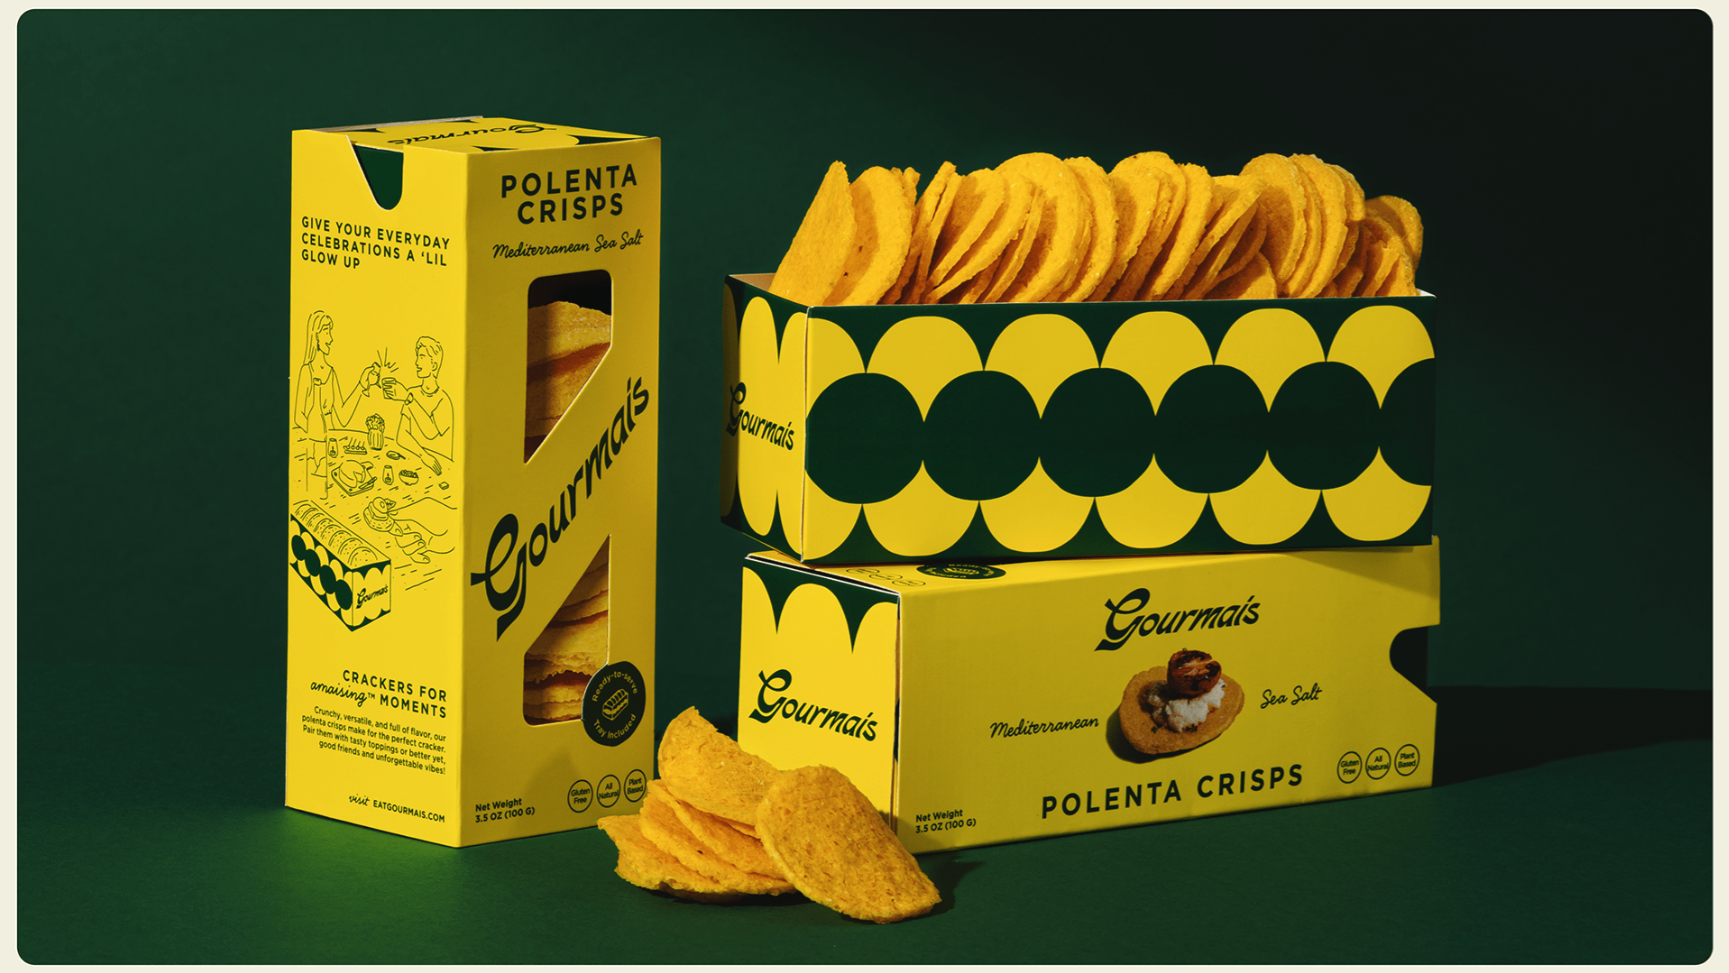 packaging design featuring duotone colors